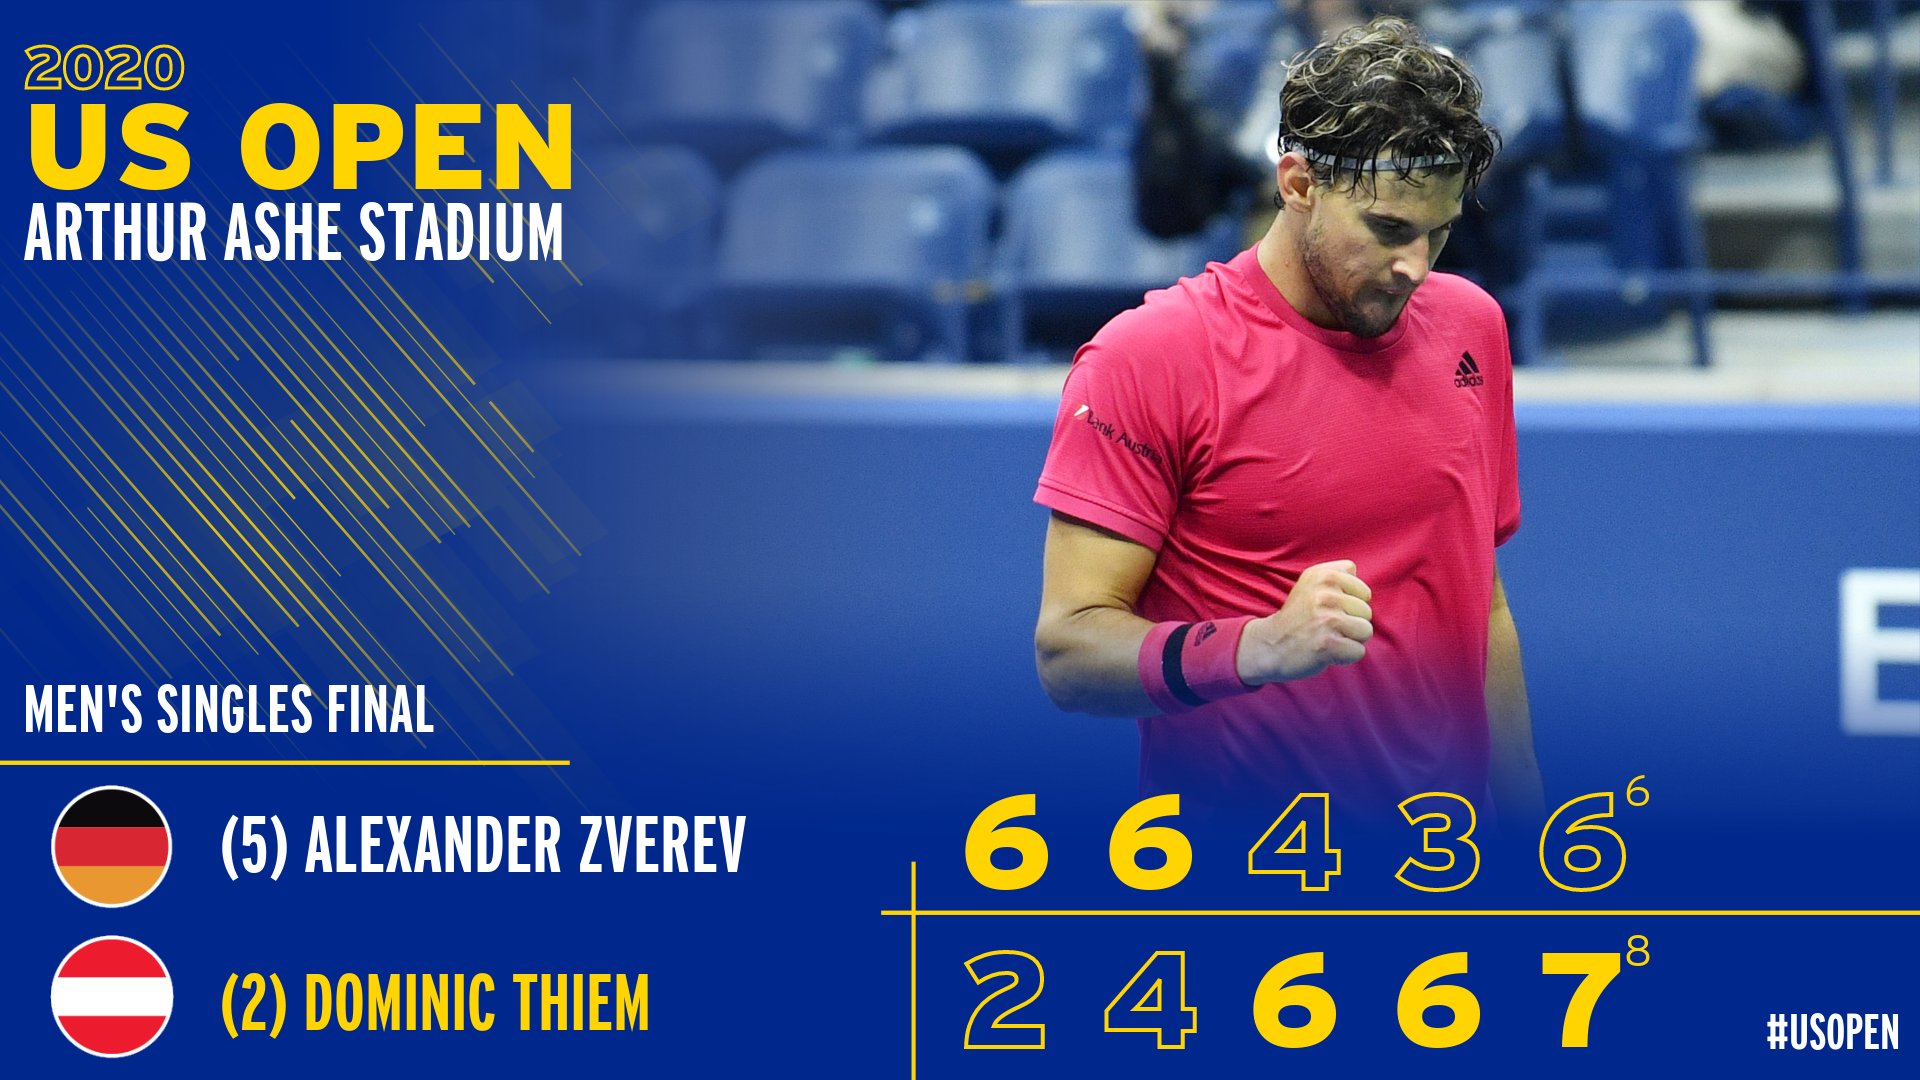 Wrijven Trots punt US Open Tennis on Twitter: "AN ALL-TIME COMEBACK! DOMINIC THIEM IS YOUR  2020 #USOPEN CHAMPION 🏆 https://t.co/HEOYT41ACh" / Twitter